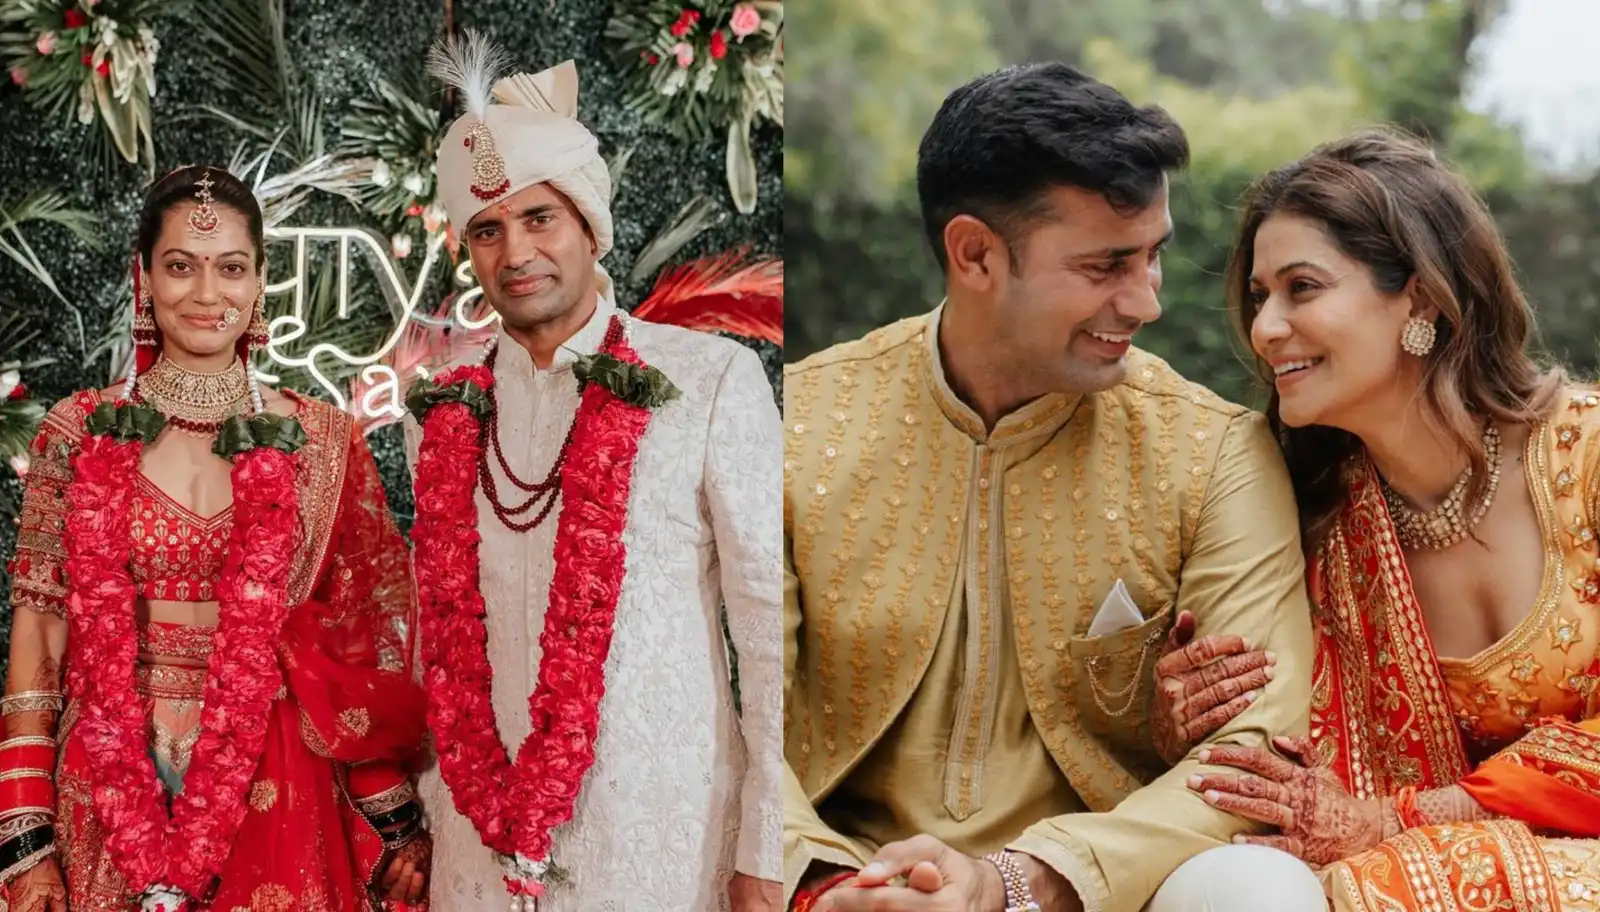 Payal Rohatgi and Sangram Singh tie the knot; photographs from their wedding festivities are pure love